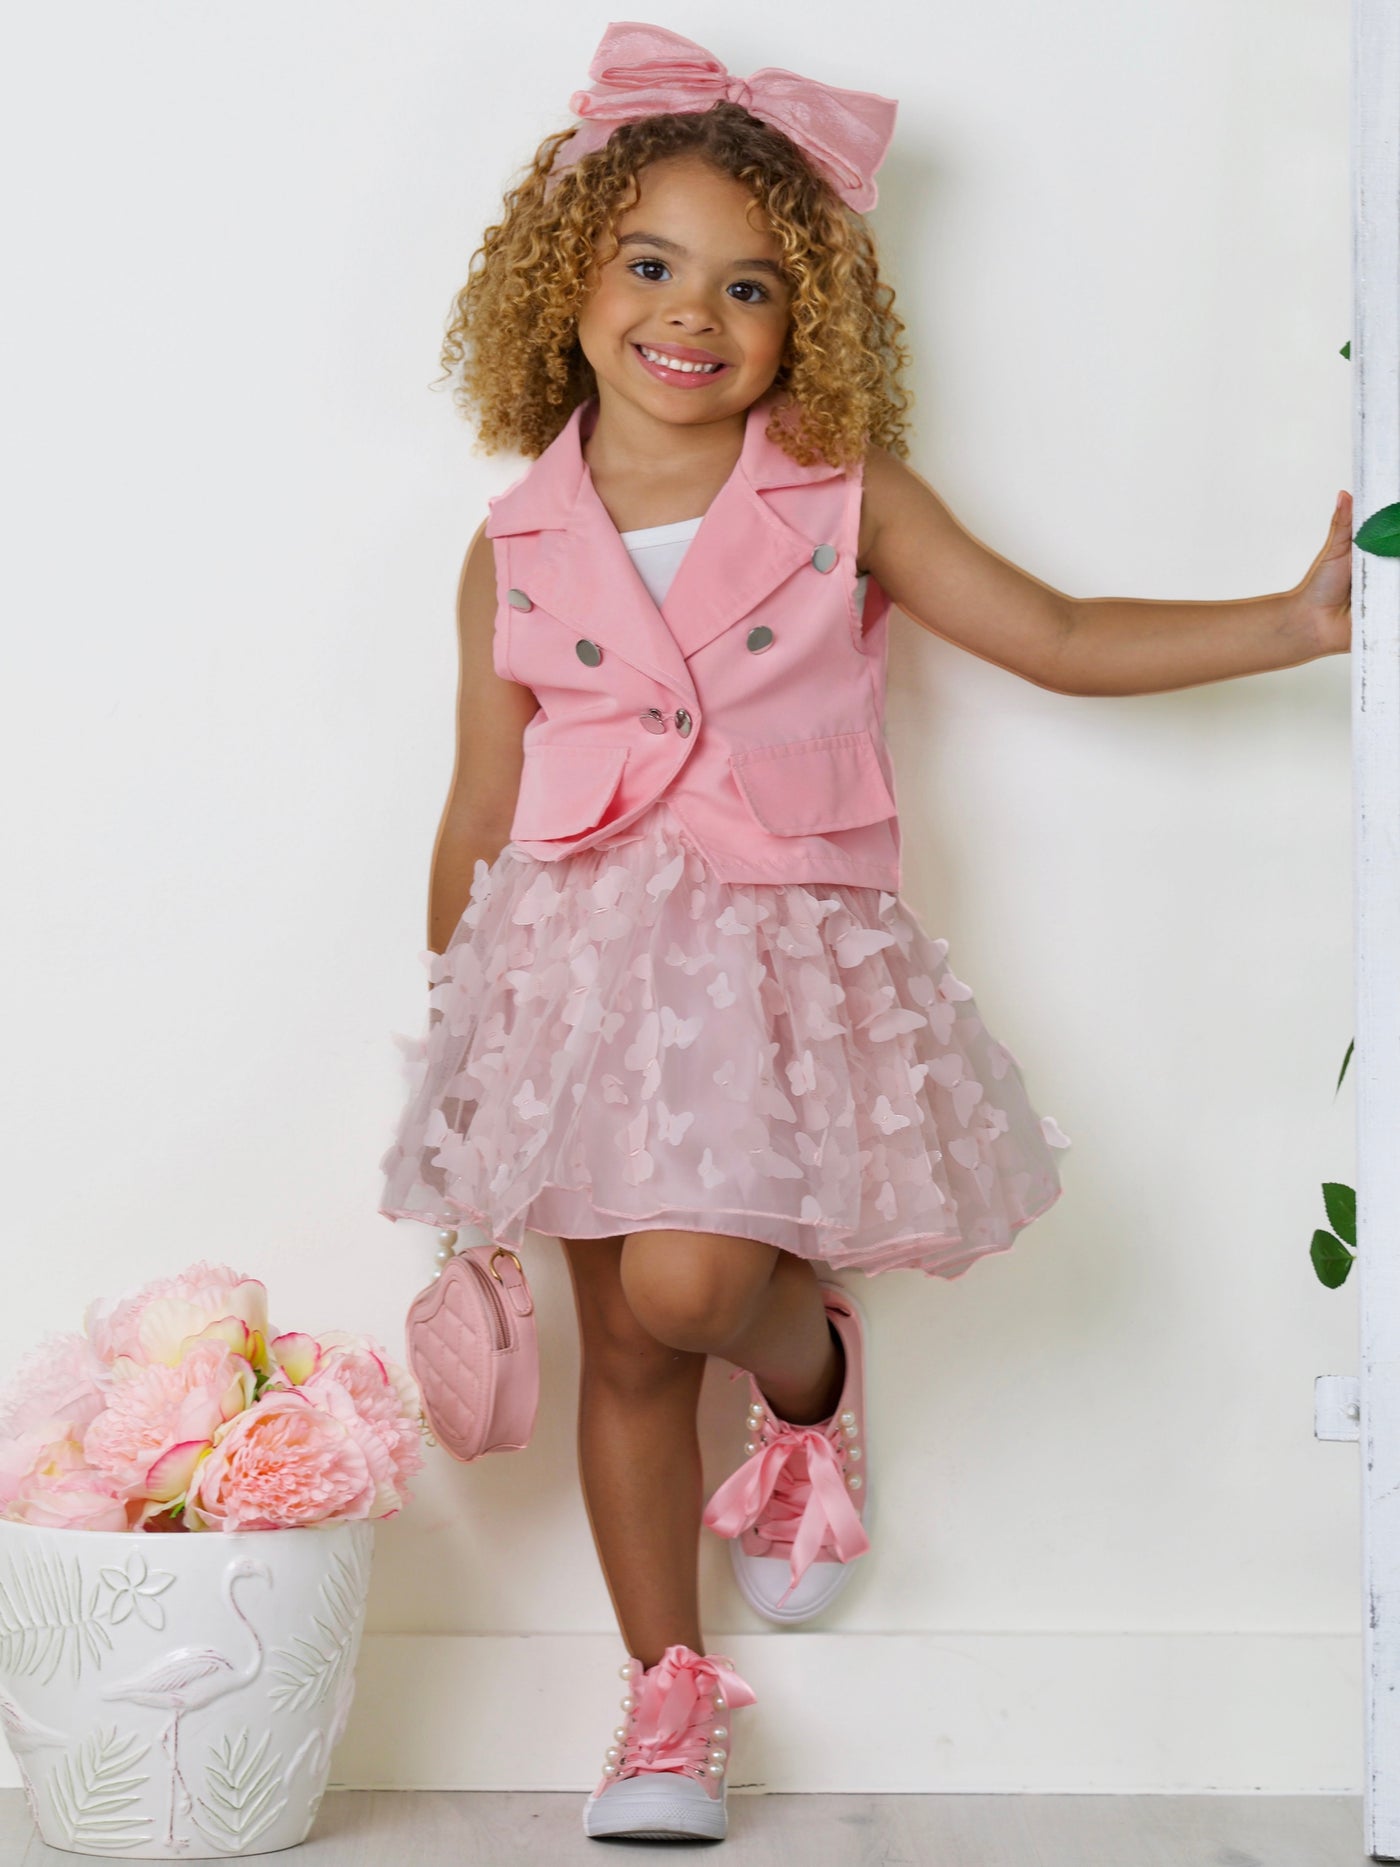 Mia Belle Girls Top, Skirt, And Vest| Girls Spring Outfits